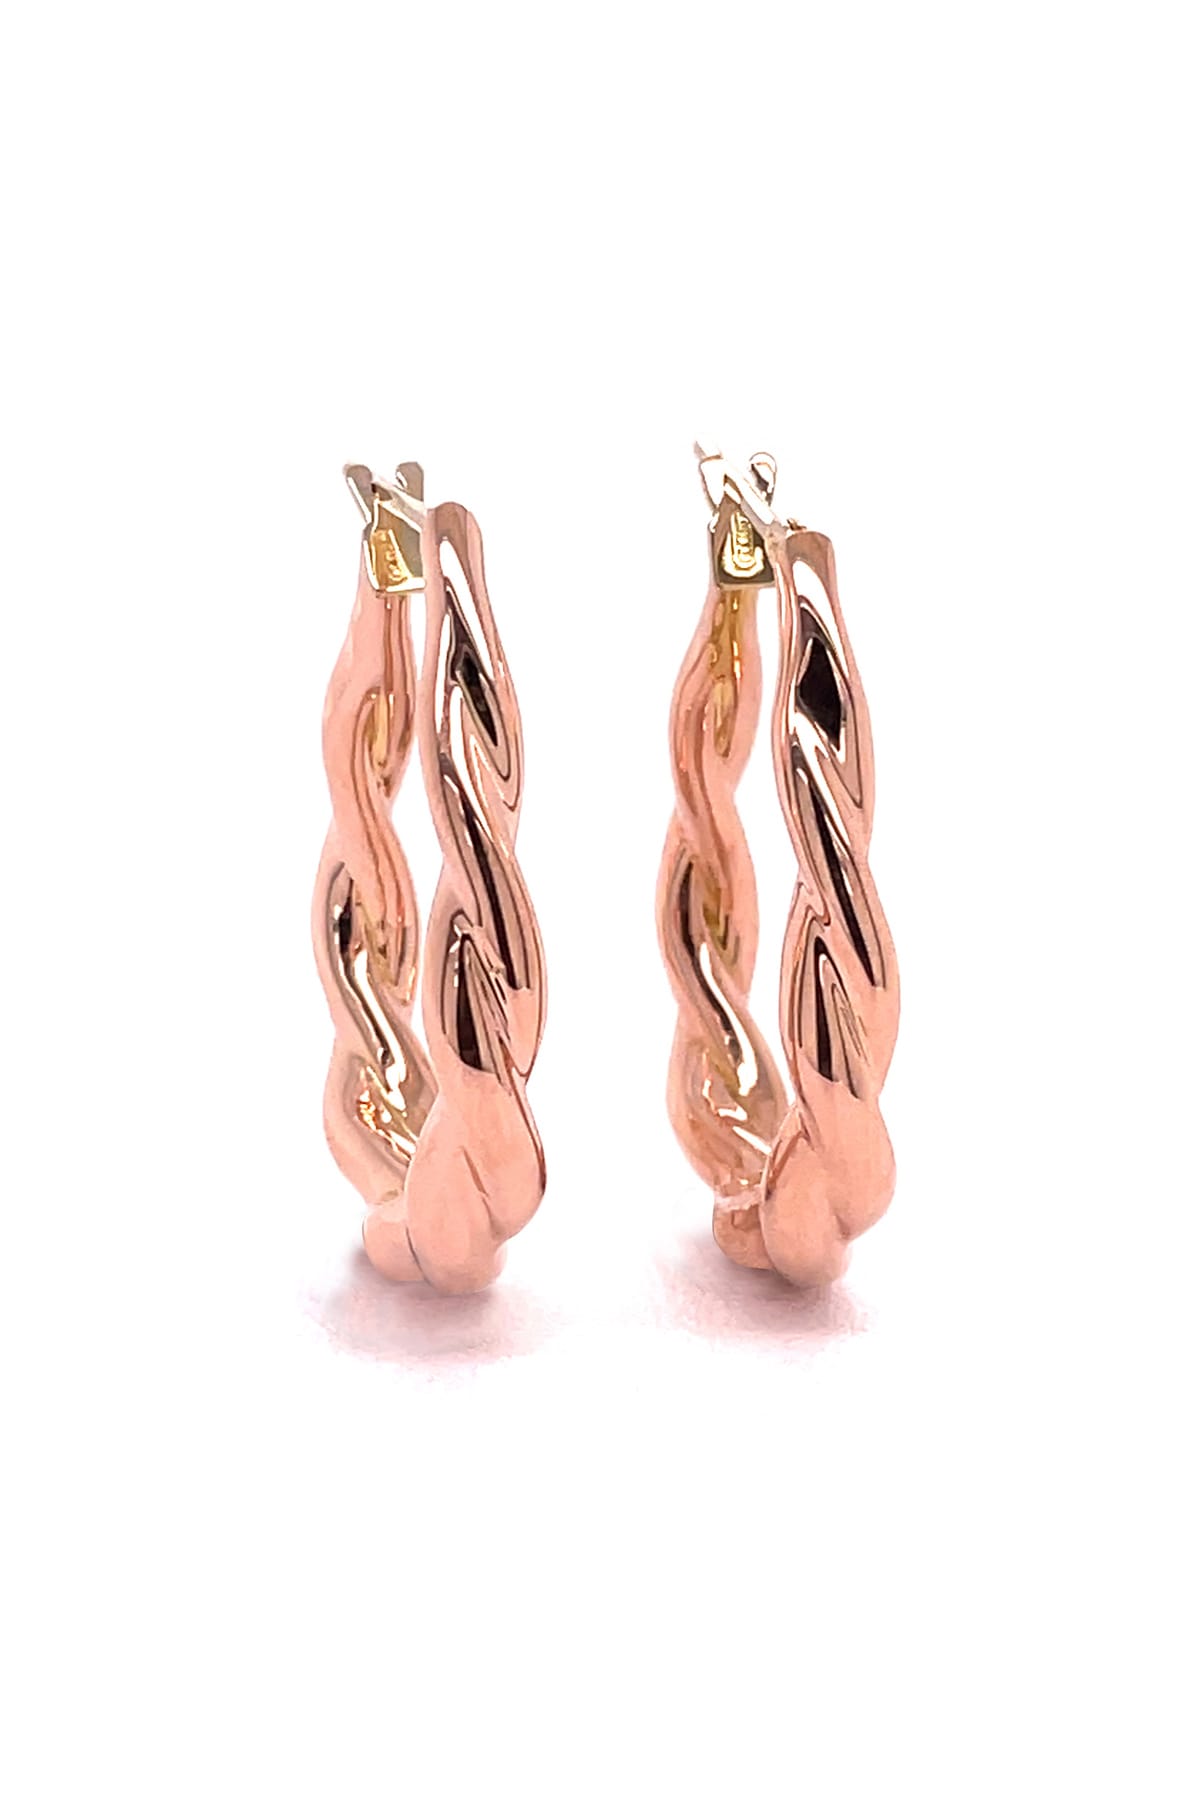 18 Carat Rose Gold Hoop Earrings available at LeGassick Diamonds and Jewellery Gold Coast, Australia.